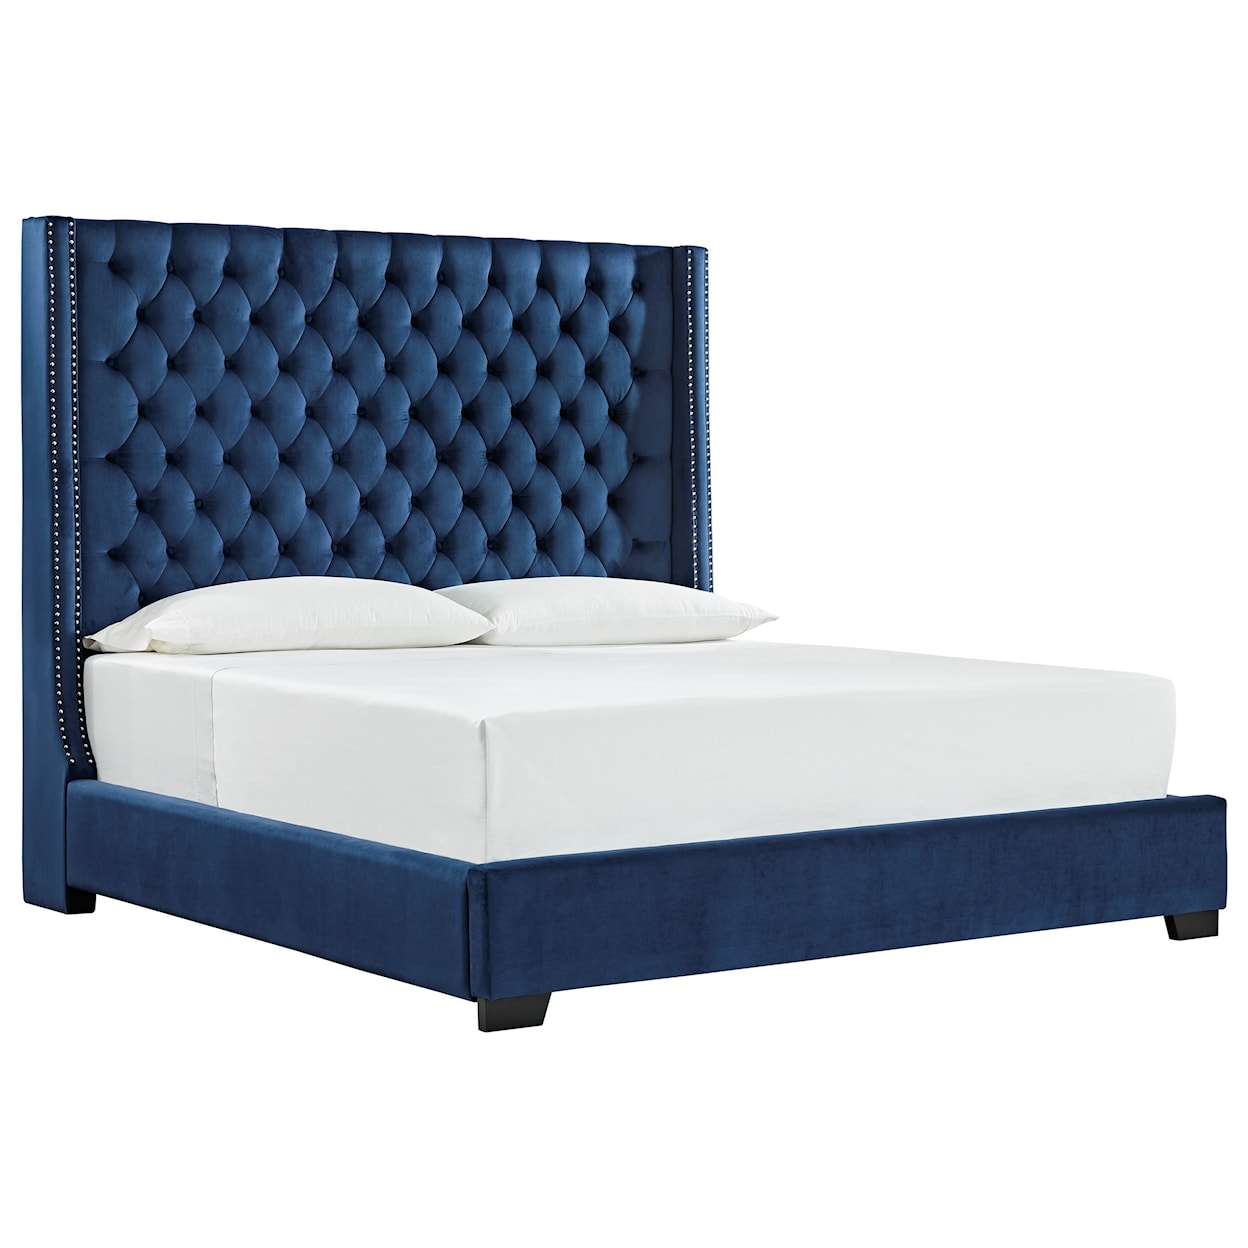 Ashley Signature Design Coralayne Queen Upholstered Bed